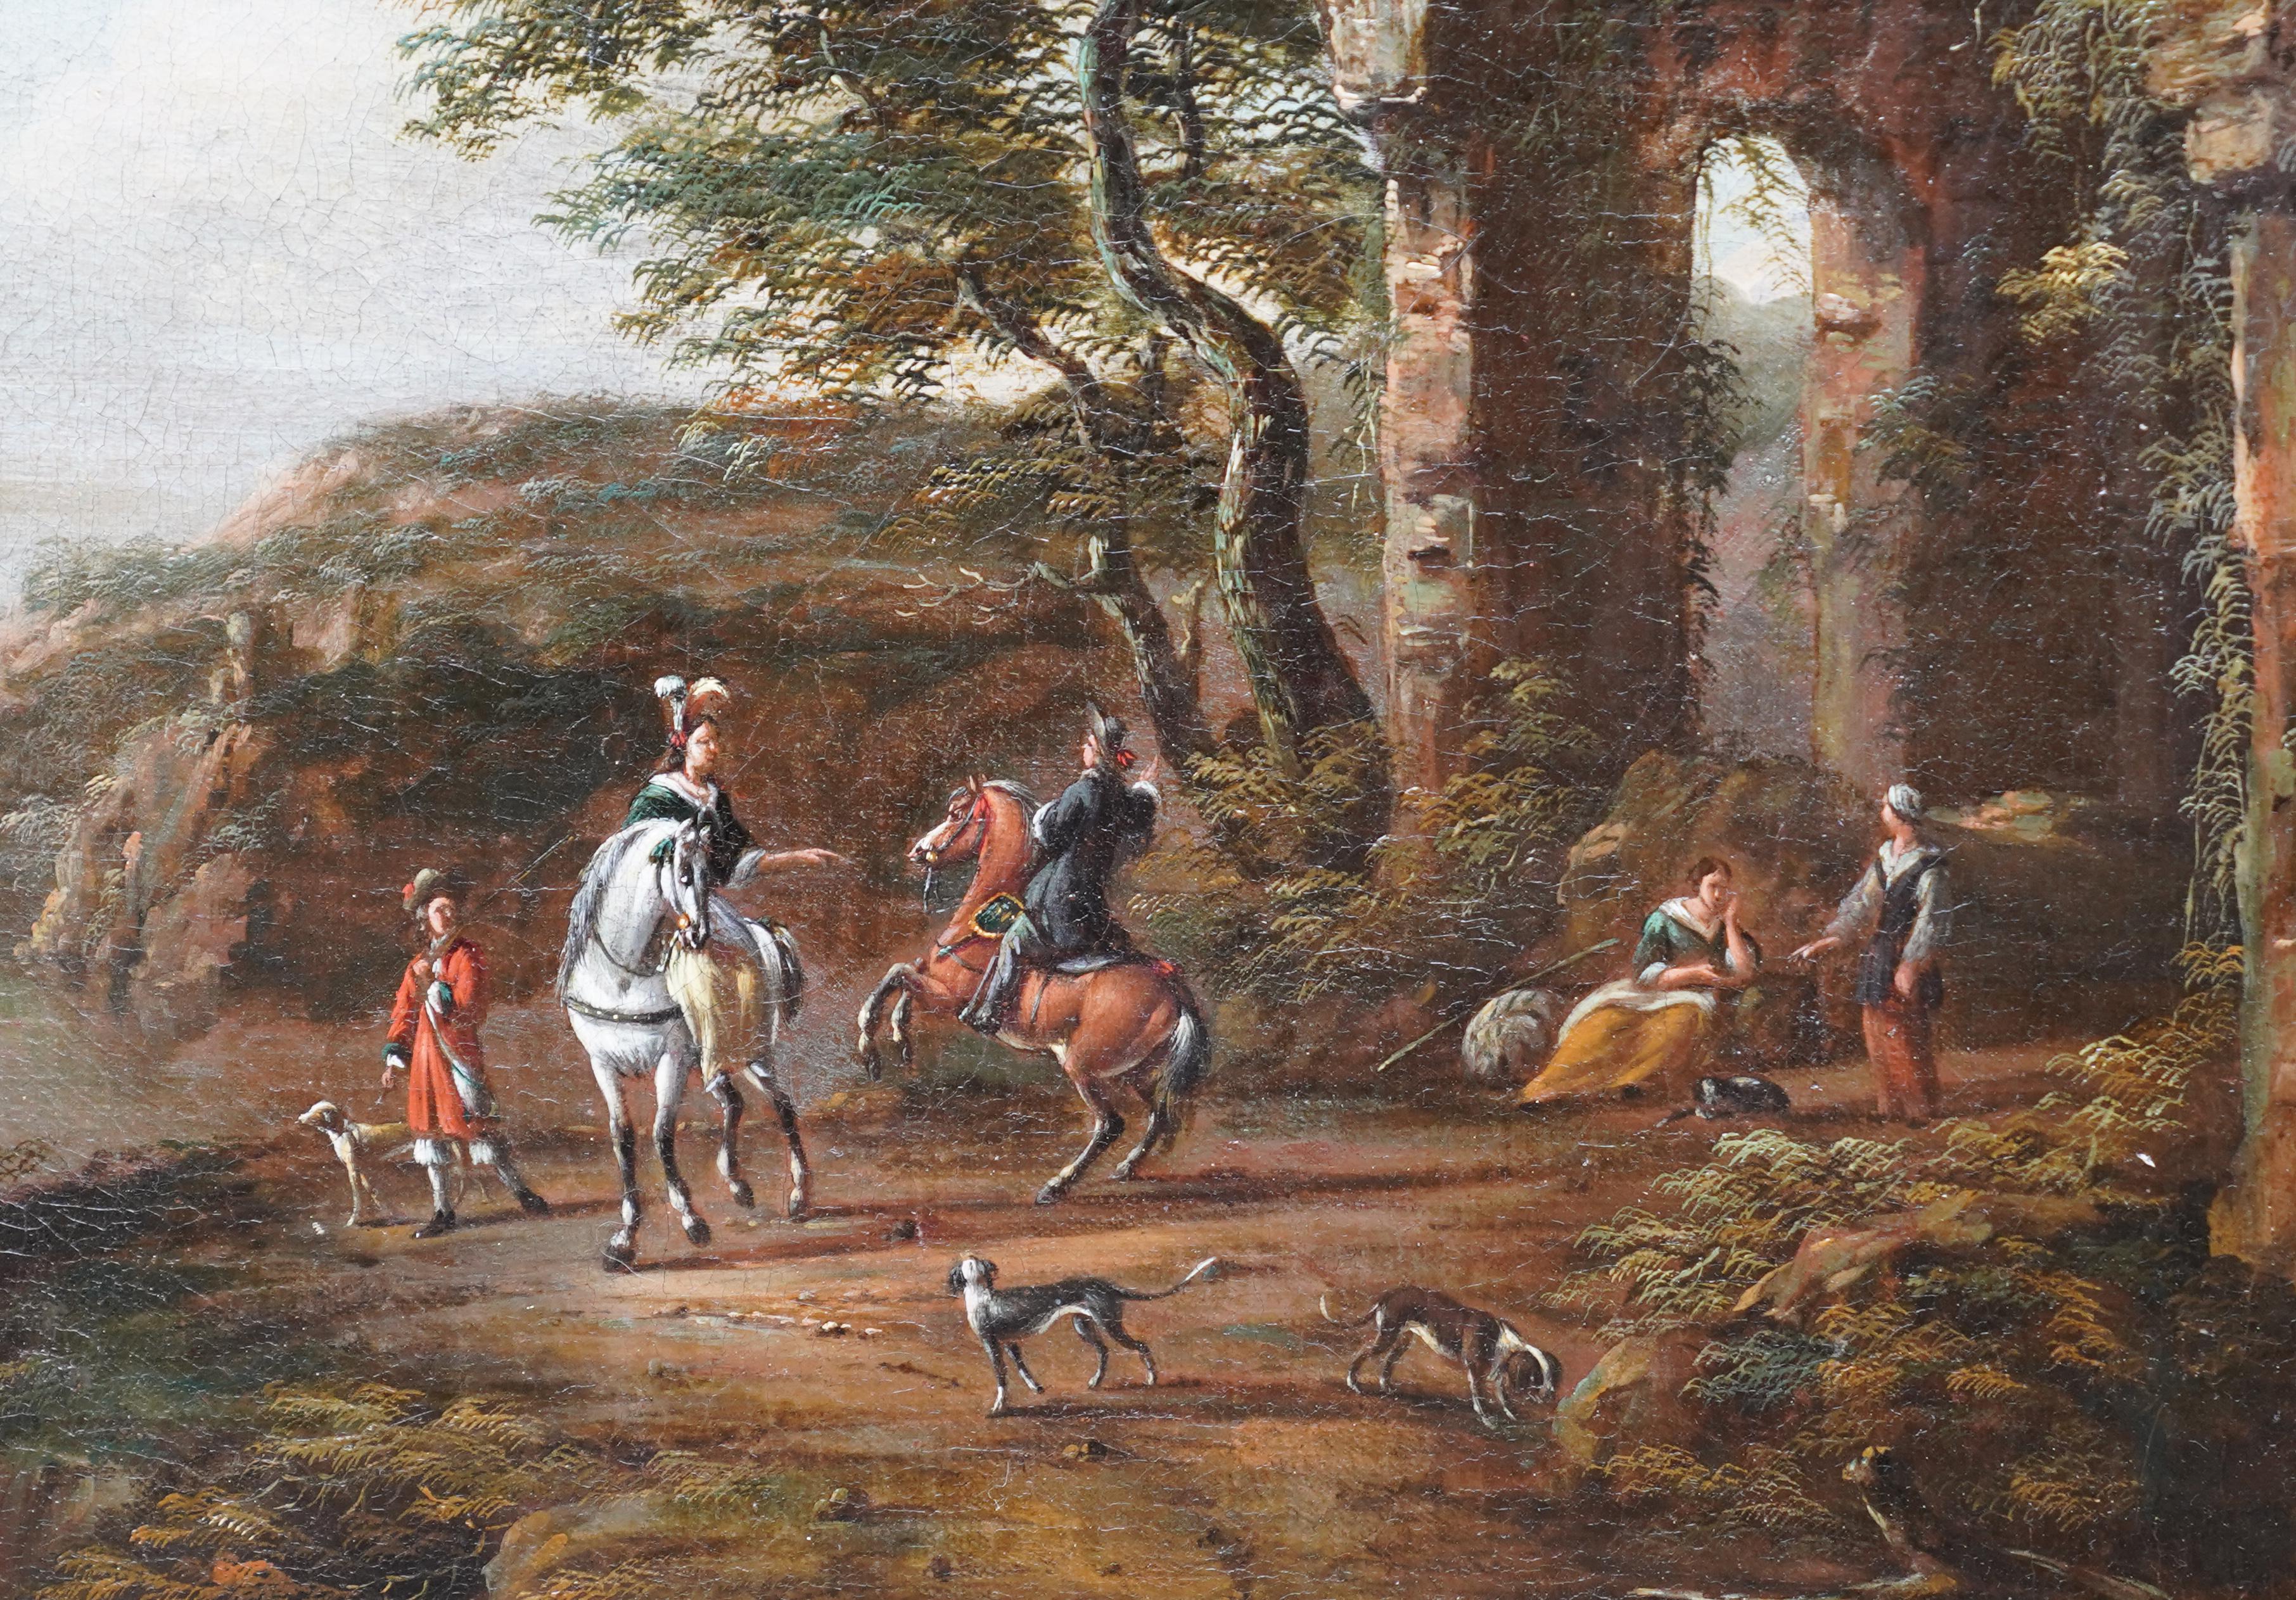 Travellers and Dogs in Landscape, Ruins on Right - Dutch Old Master oil painting For Sale 2